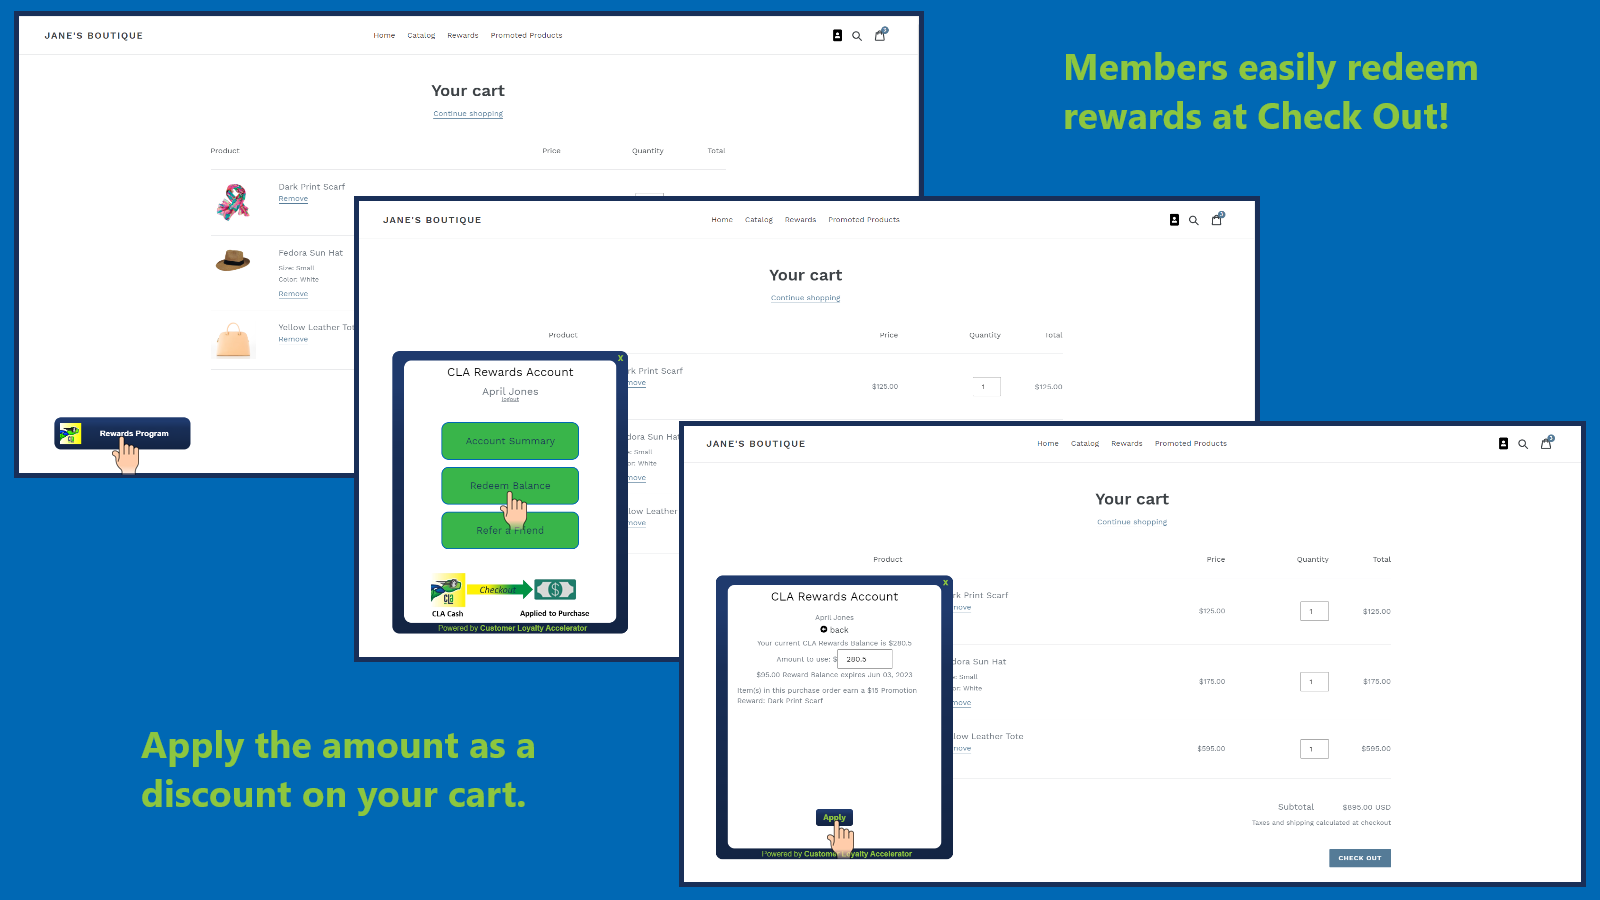 It's easy for members to use rewards at checkout in your store.